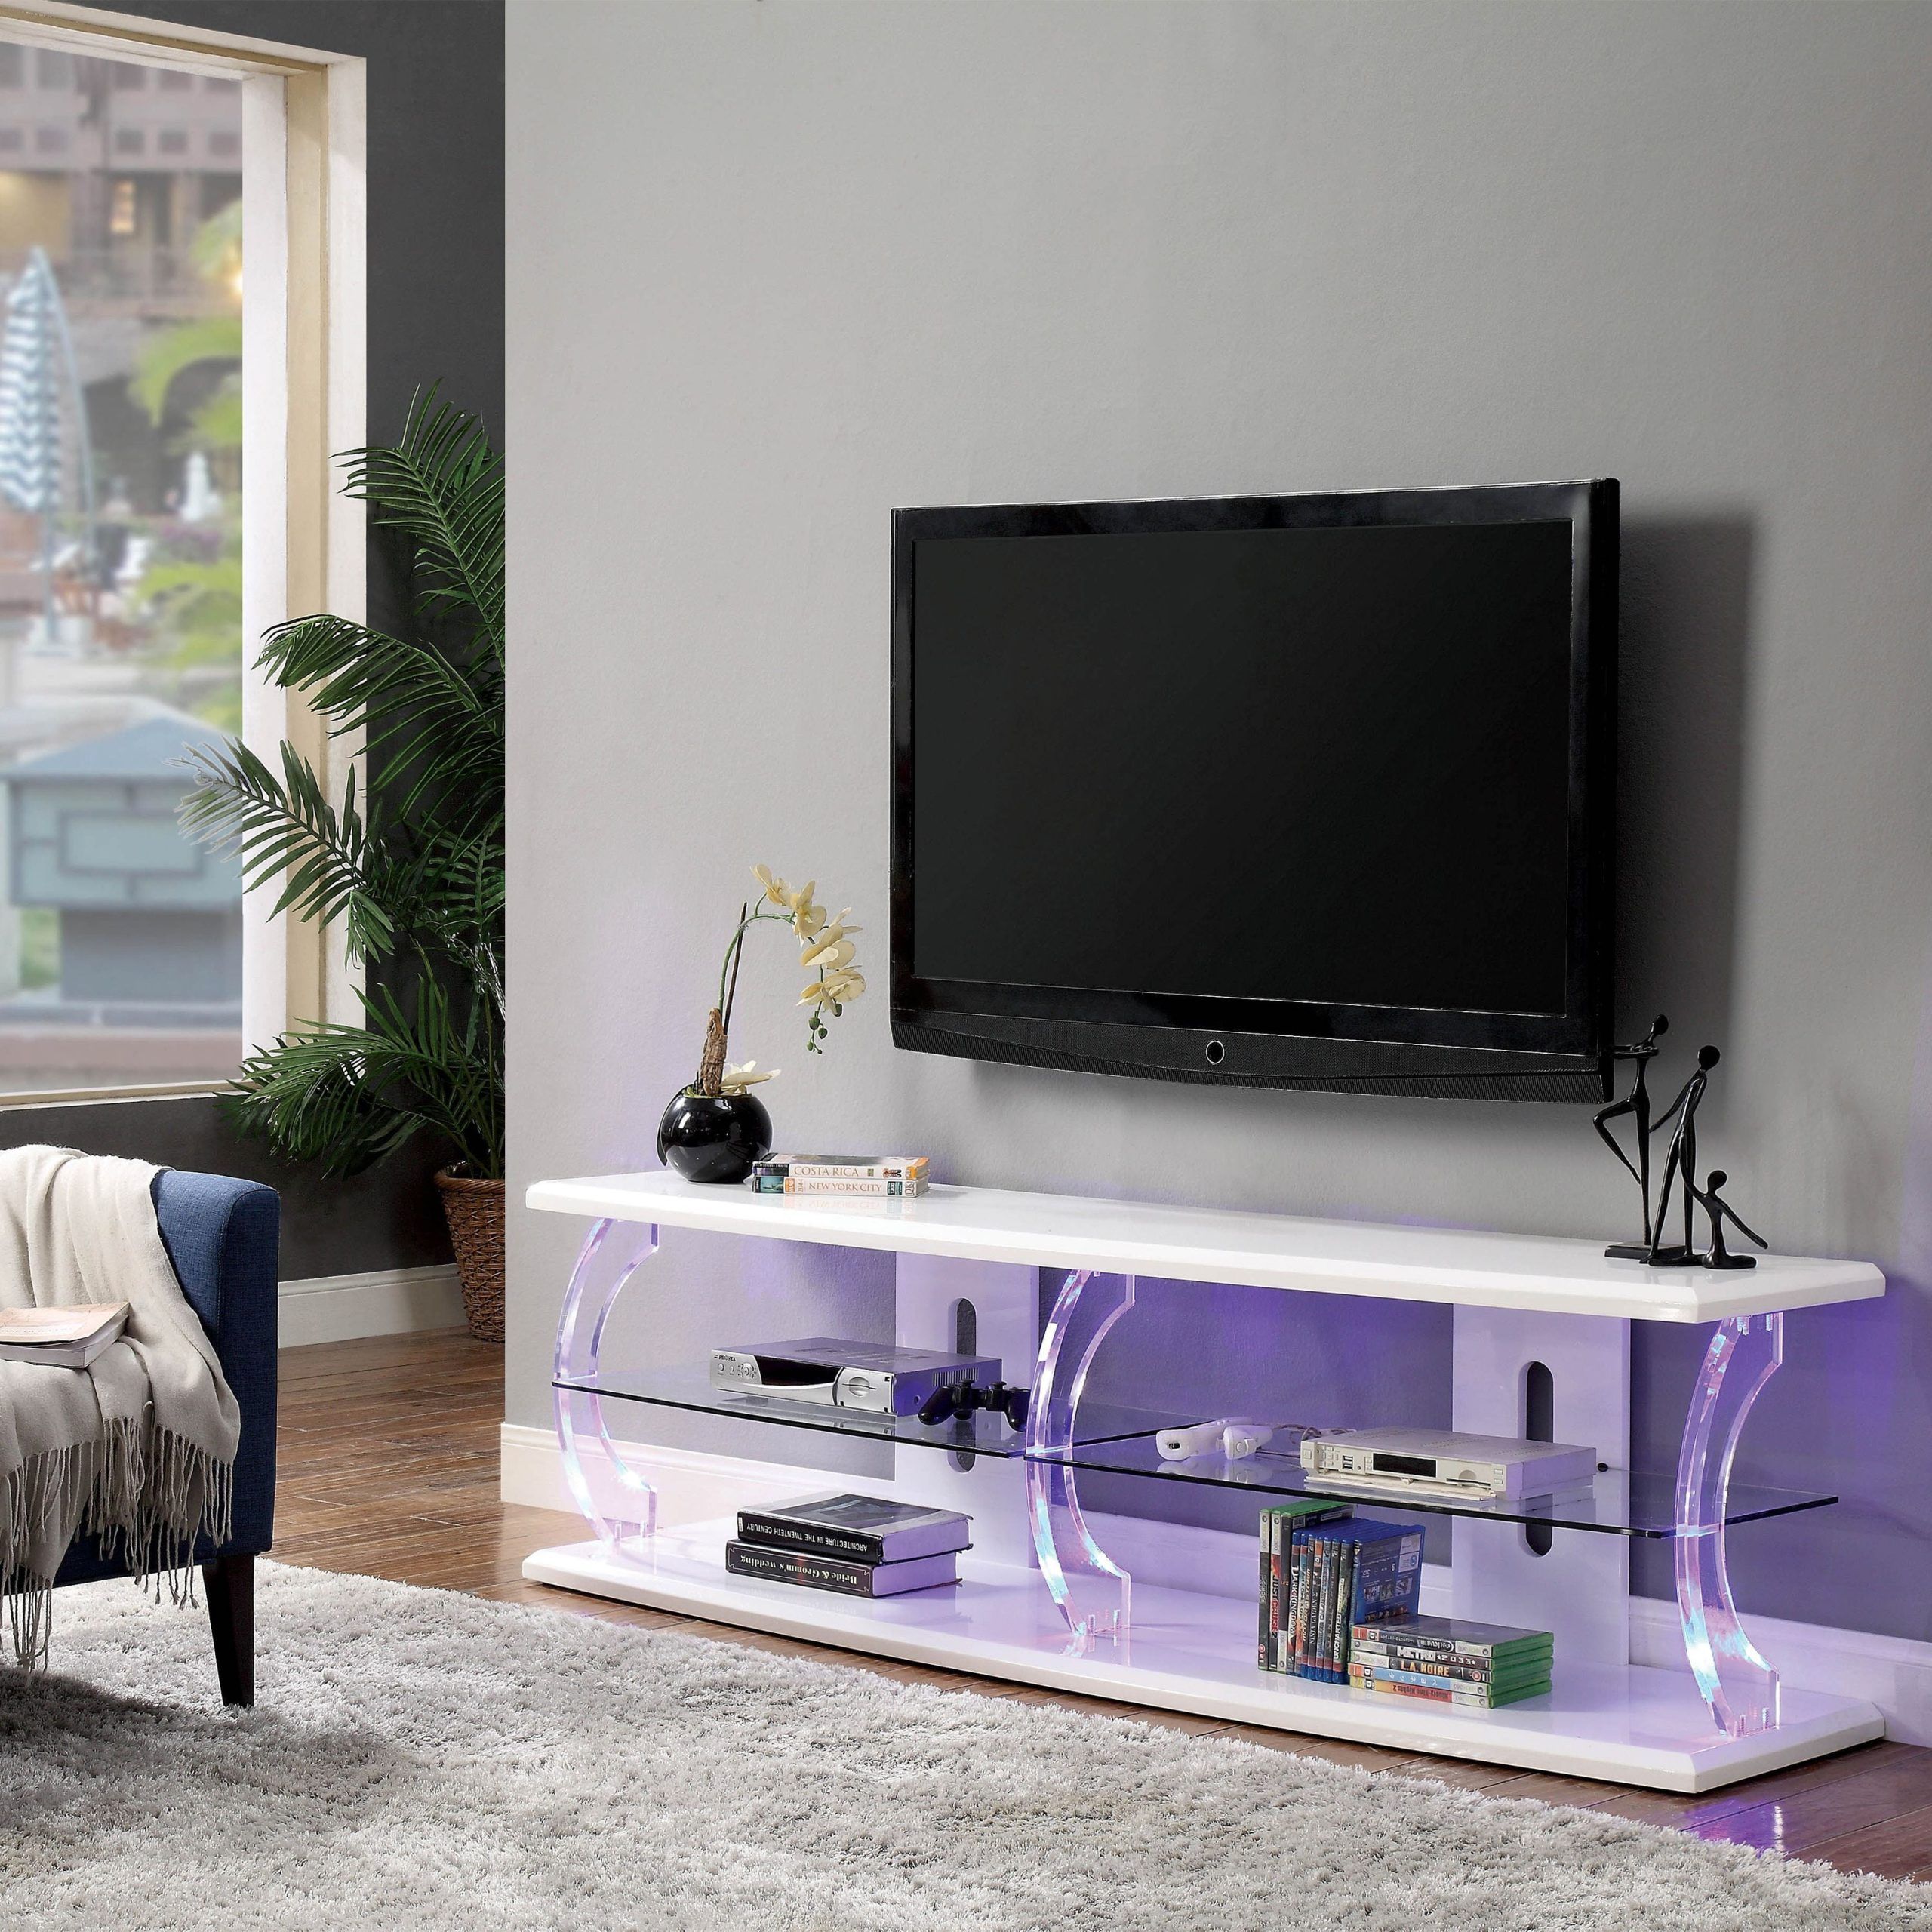 Furniture Of America Vedot Contemporary Led Tv Stand, 72", White And Regarding Tv Stands With Lights (Gallery 14 of 20)